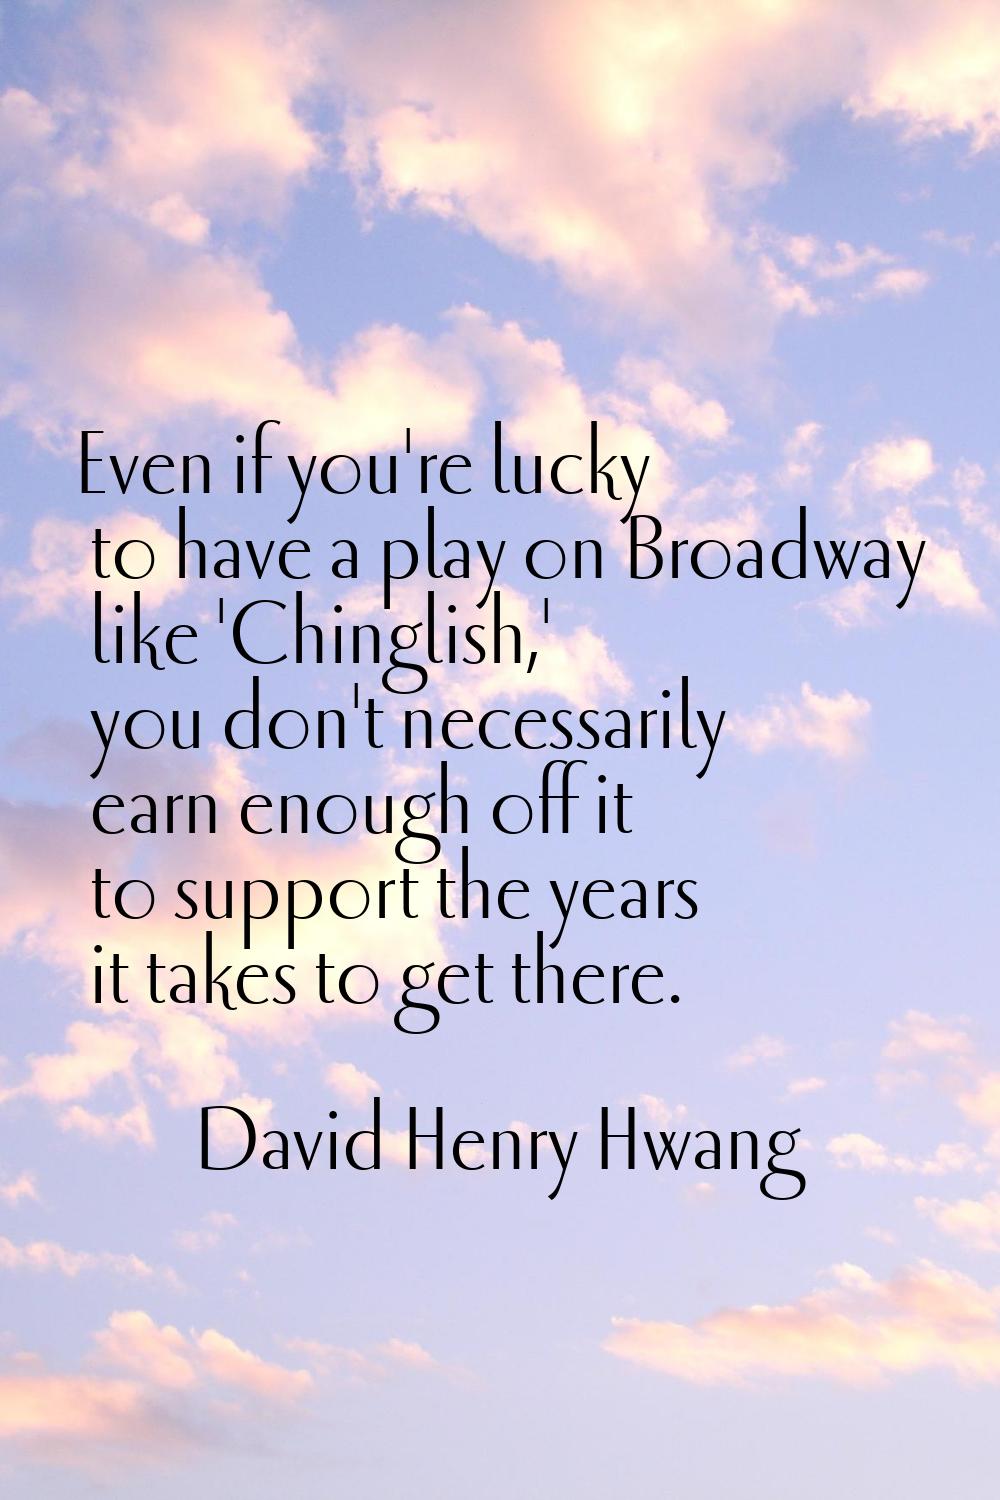 Even if you're lucky to have a play on Broadway like 'Chinglish,' you don't necessarily earn enough